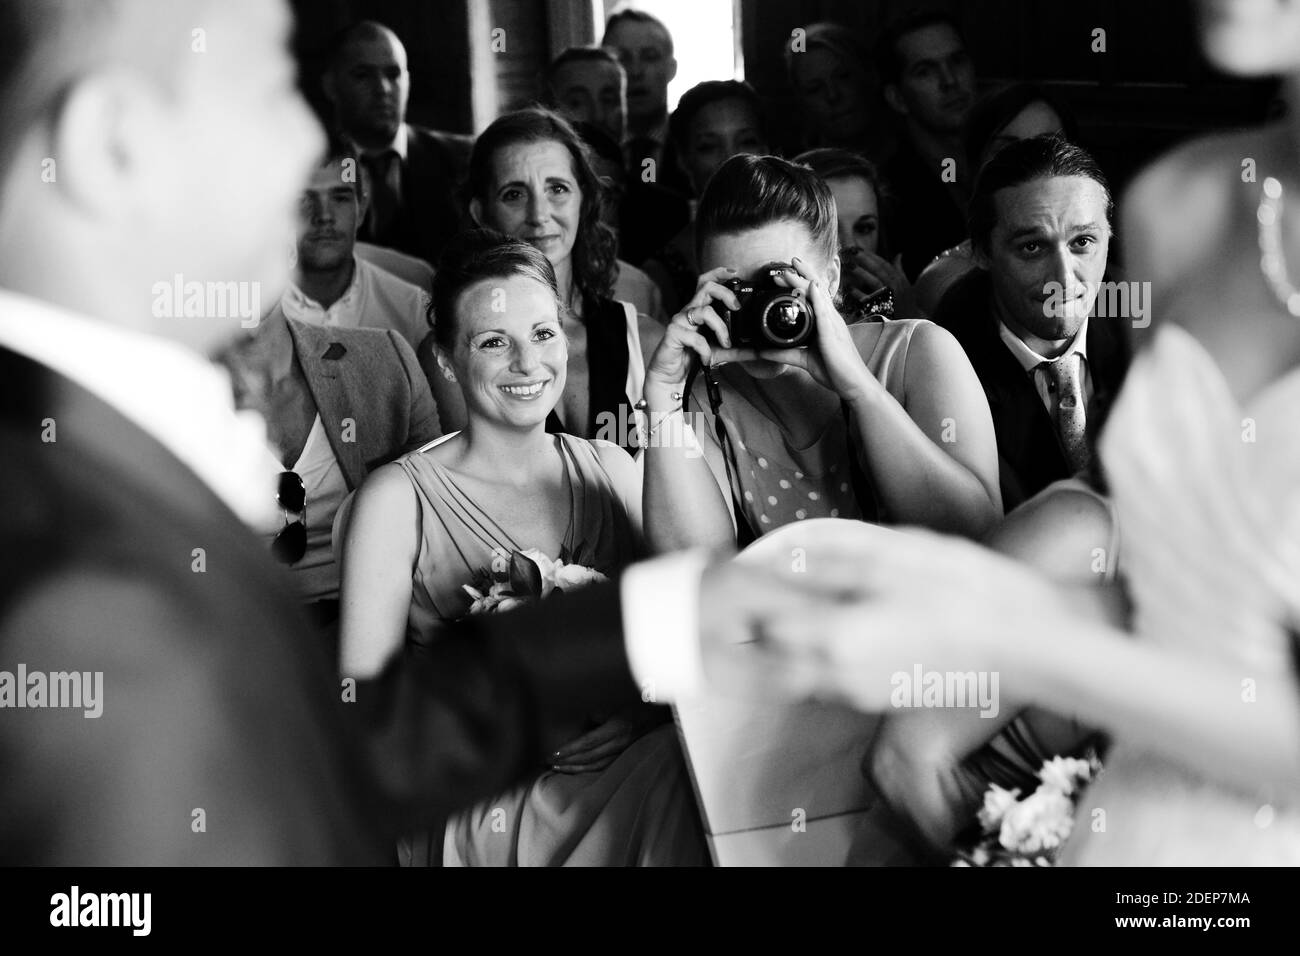 Seated wedding guest with compact SLR camera photographs wedding ceremony as bride and groom hold hands for their wedding vows Stock Photo